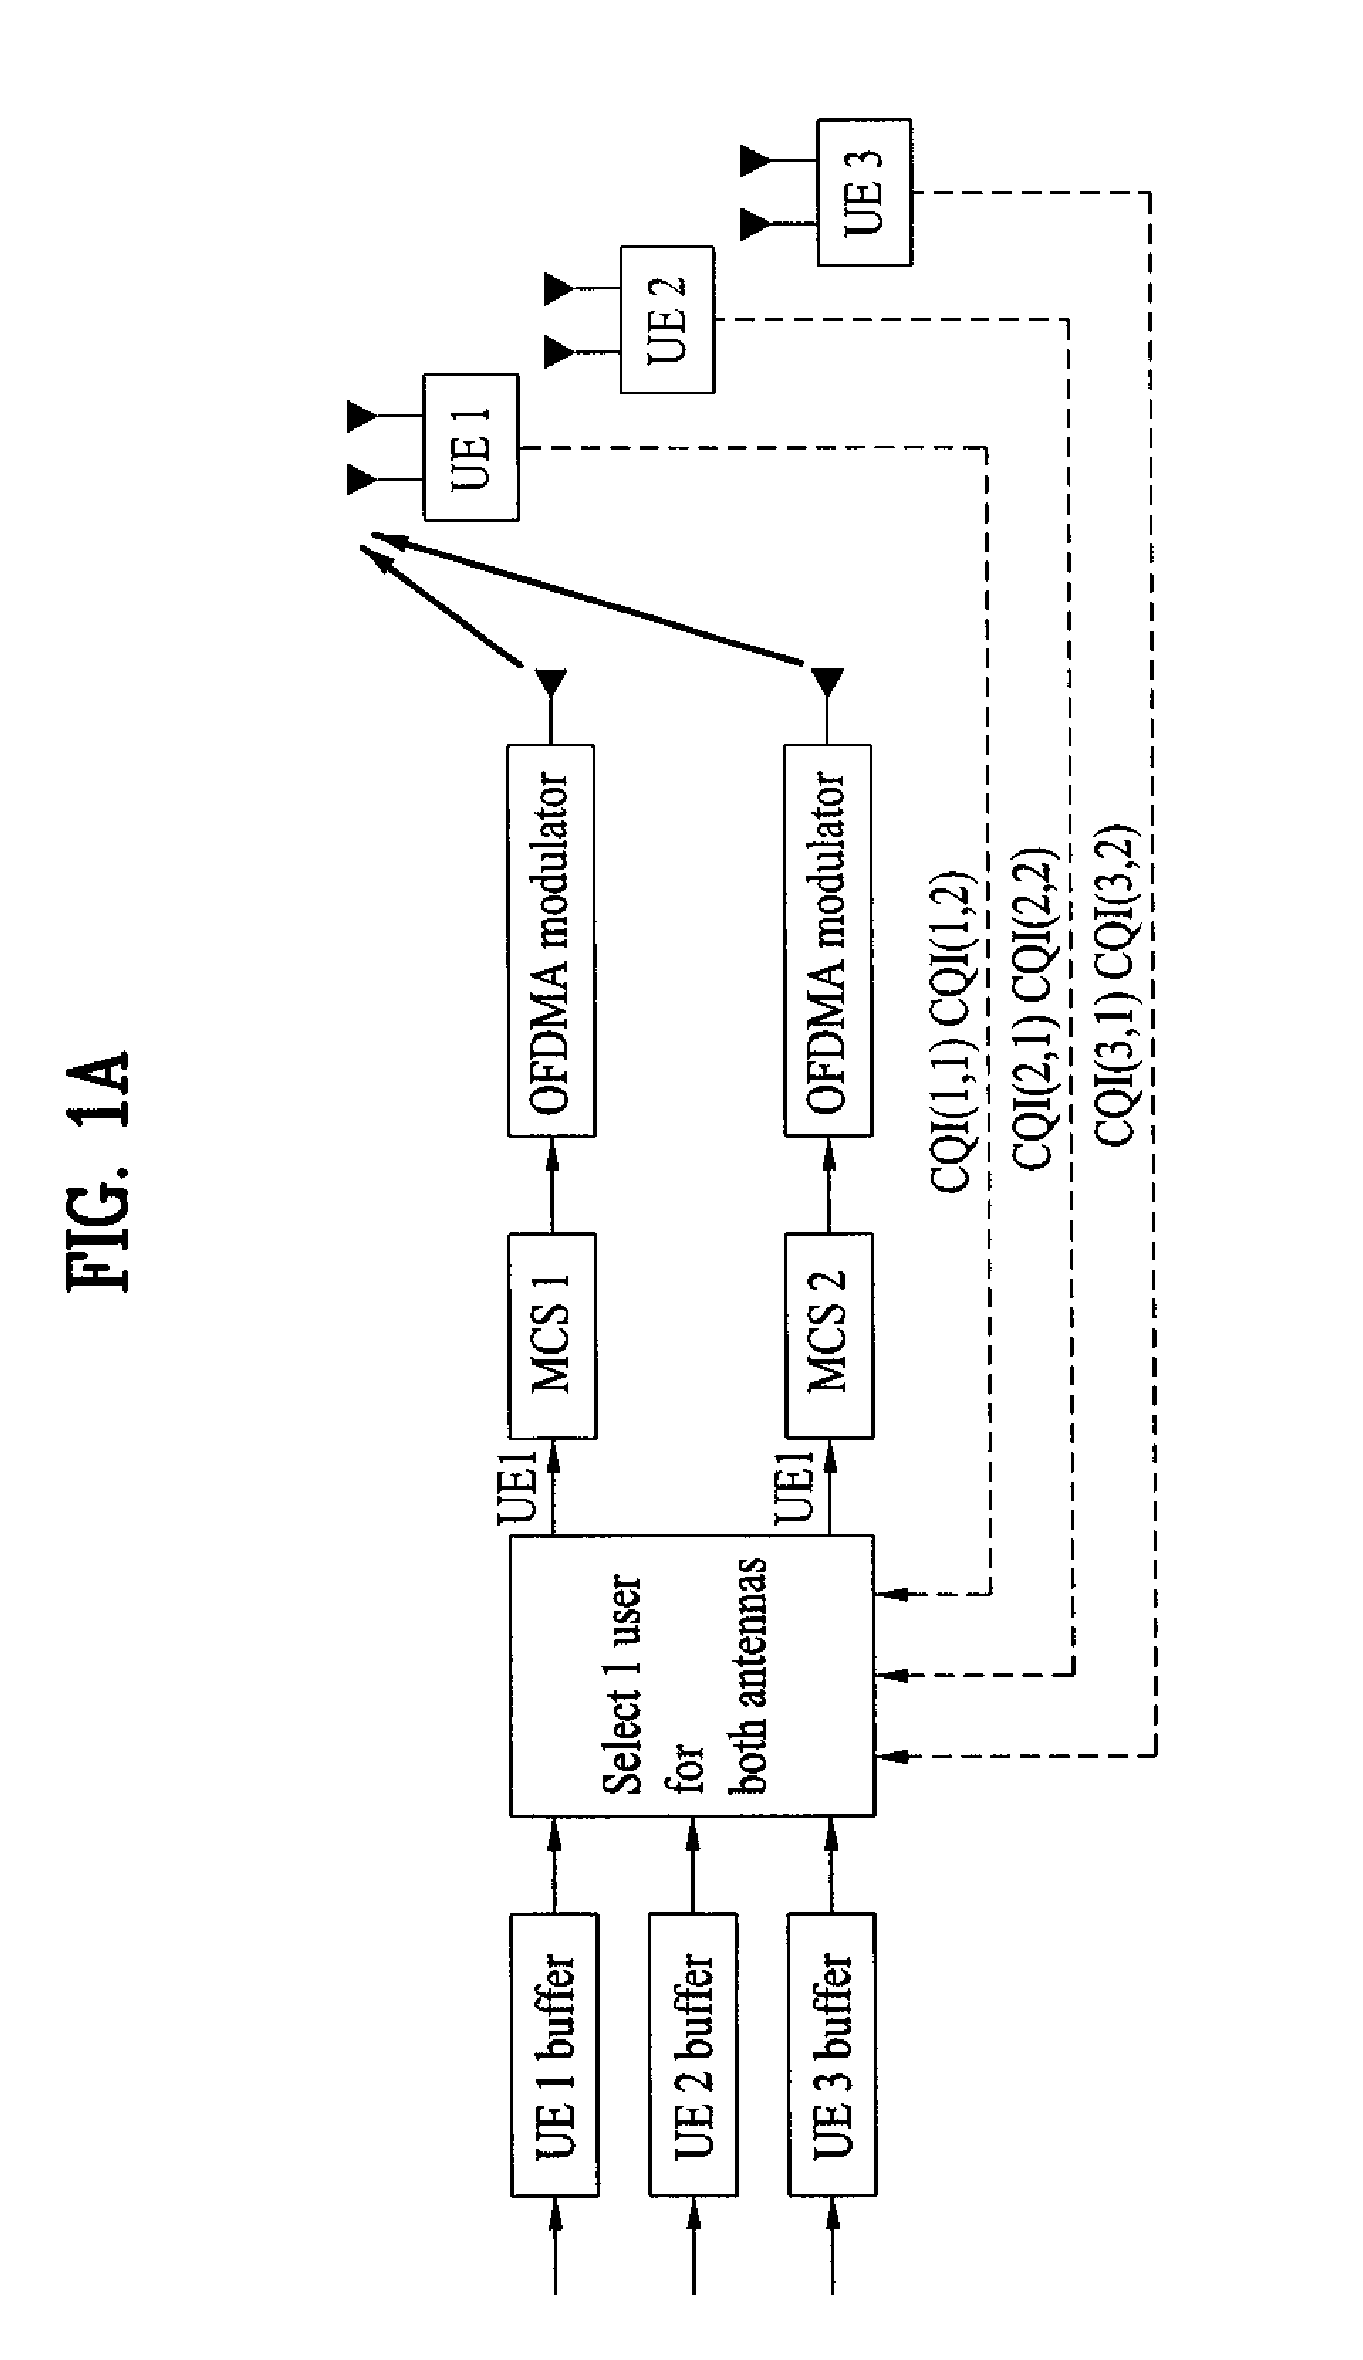 Method of transmitting using phase shift-based precoding and apparatus for implementing the same in a wireless communication system